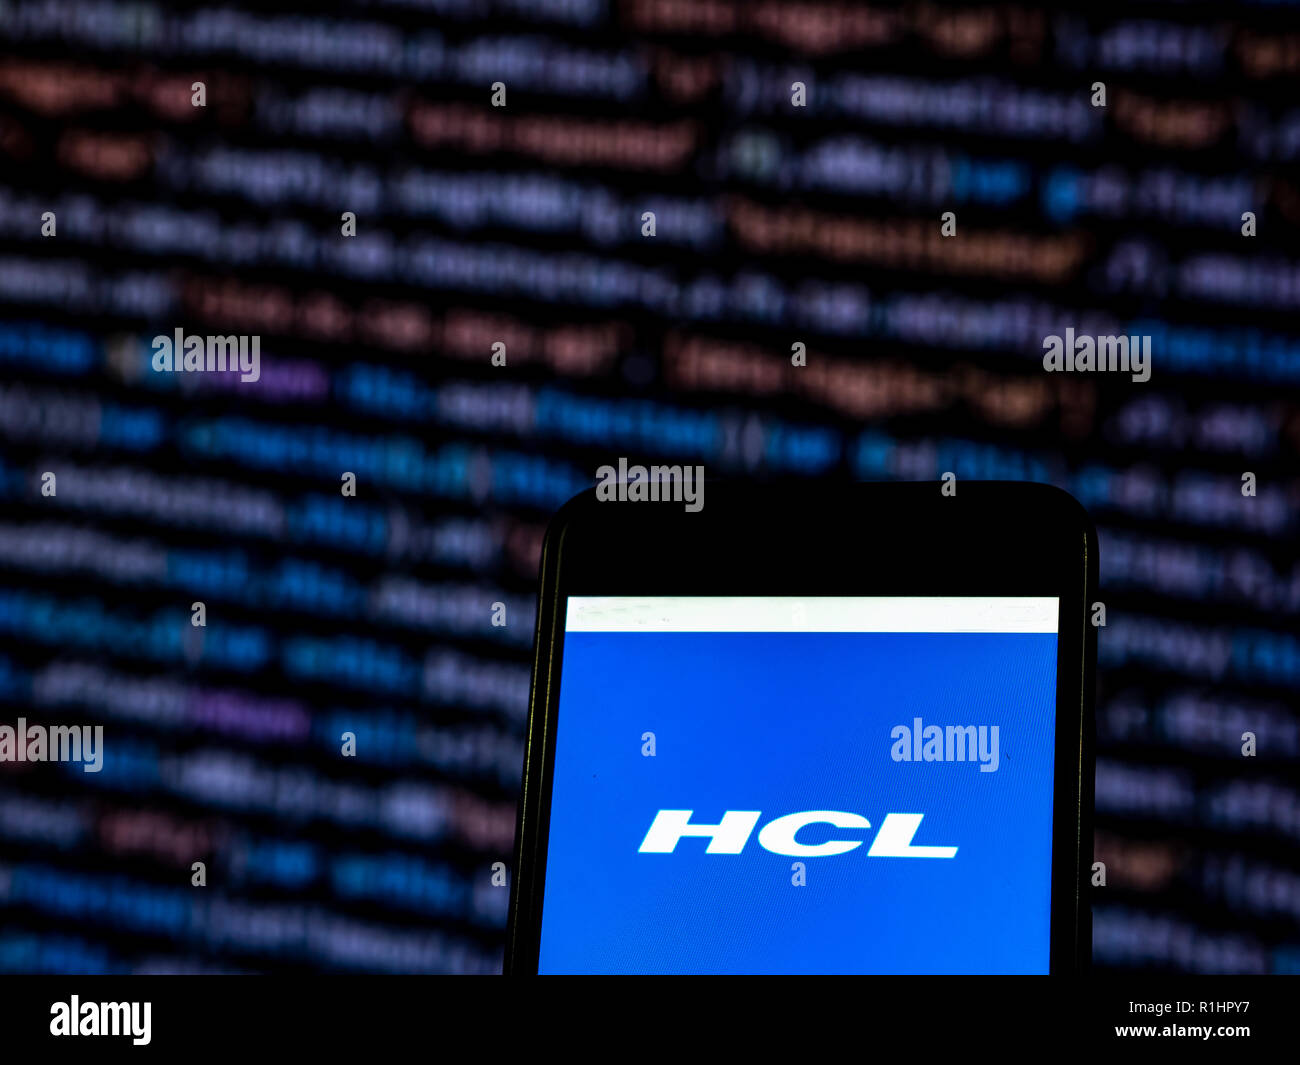 HCL Technologies Software company logo seen displayed on smart phone. HCL Technologies Limited is an Indian multinational technology company, head quartered in Noida, Uttar Pradesh, India. It is a subsidiary of HCL Enterprise. Originally a research and development division of HCL, it emerged as an independent company in 1991 when HCL ventured into the software services business. Stock Photo